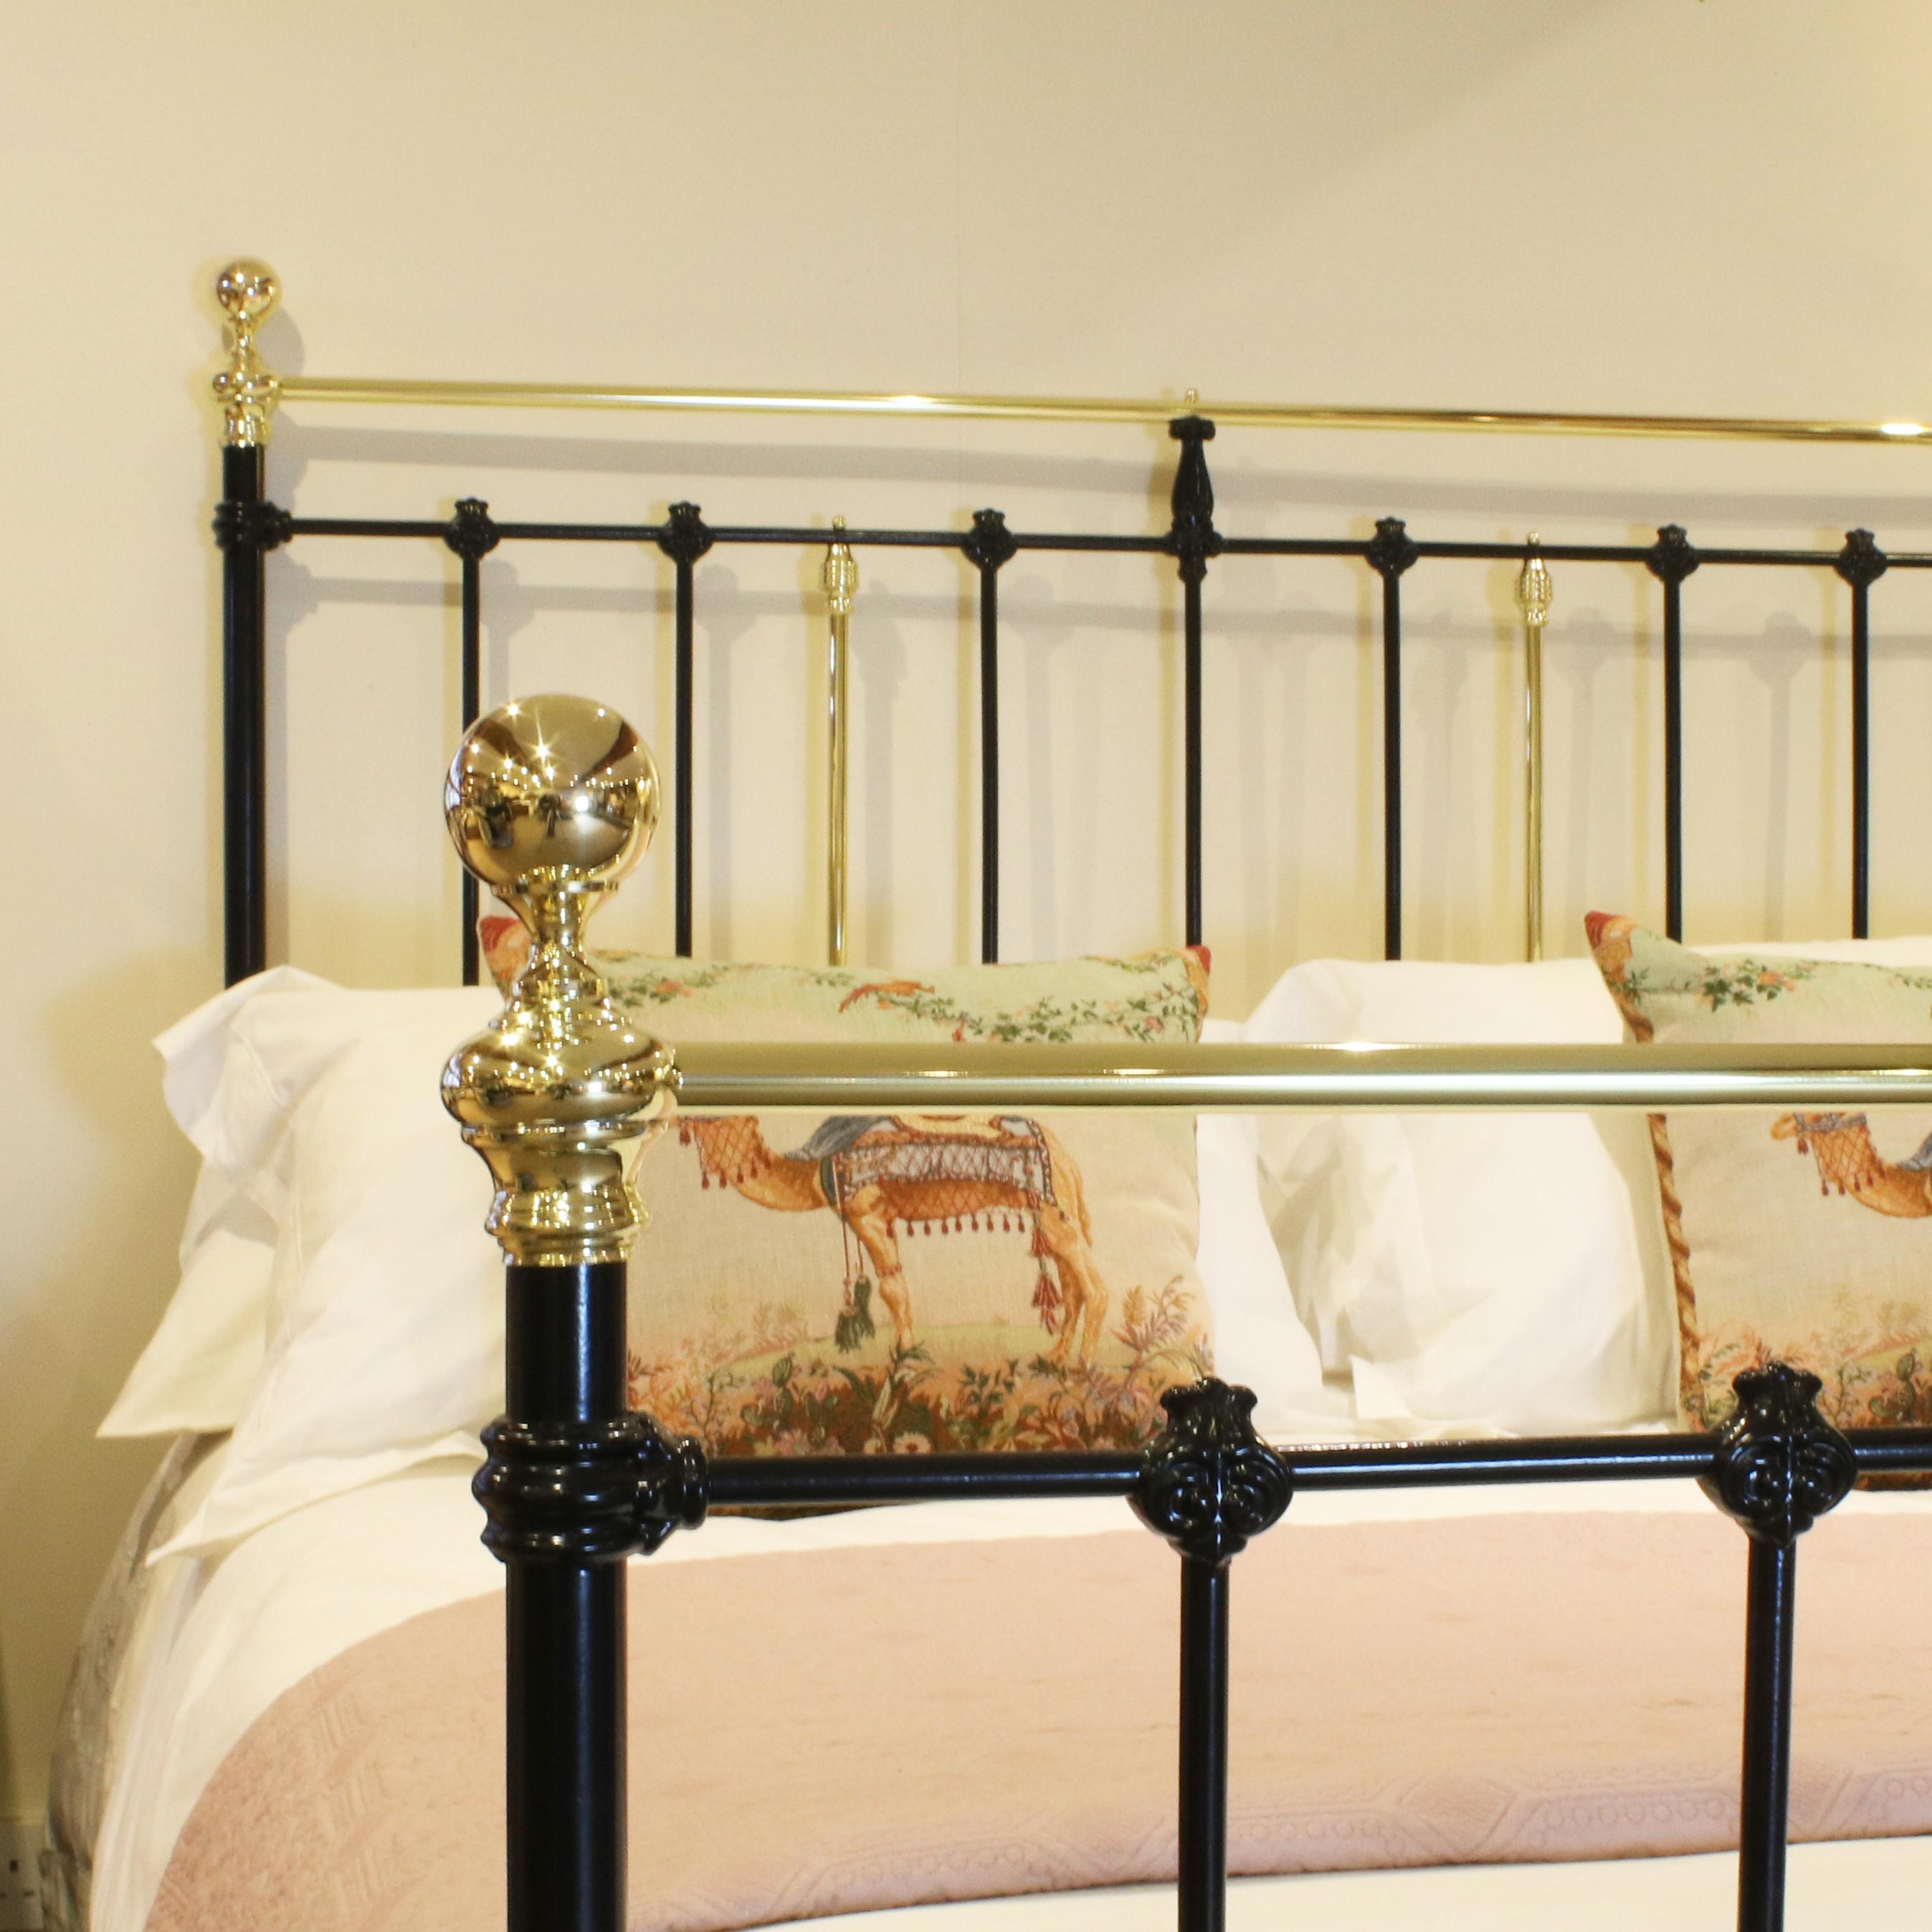 King size brass and iron bed finished in black with decorative castings and straight brass top rail.

The price is for the bed frame alone. The base, mattress, bedding and linen are extra and can be supplied.